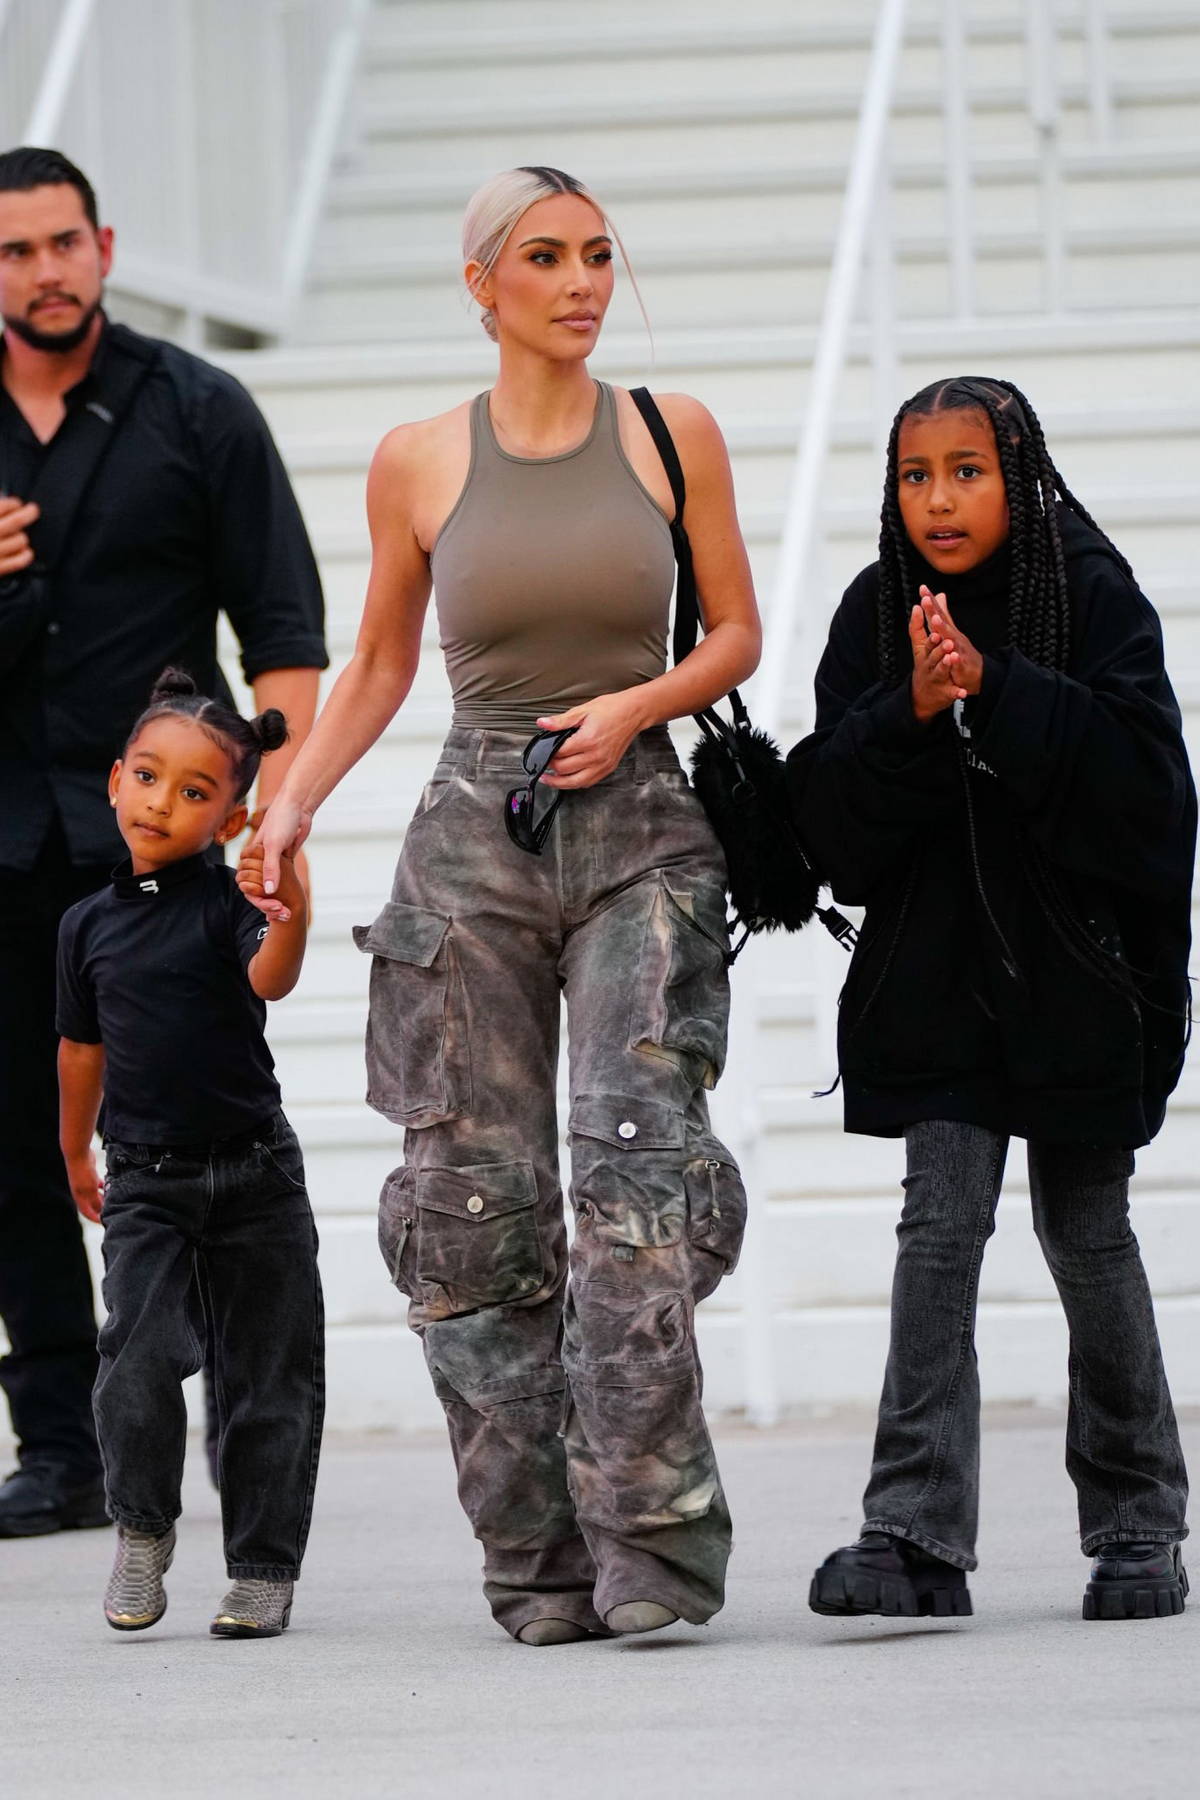 Kim Kardashian rocks a skin-tight tank top and stone-washed cargo pants  while out with